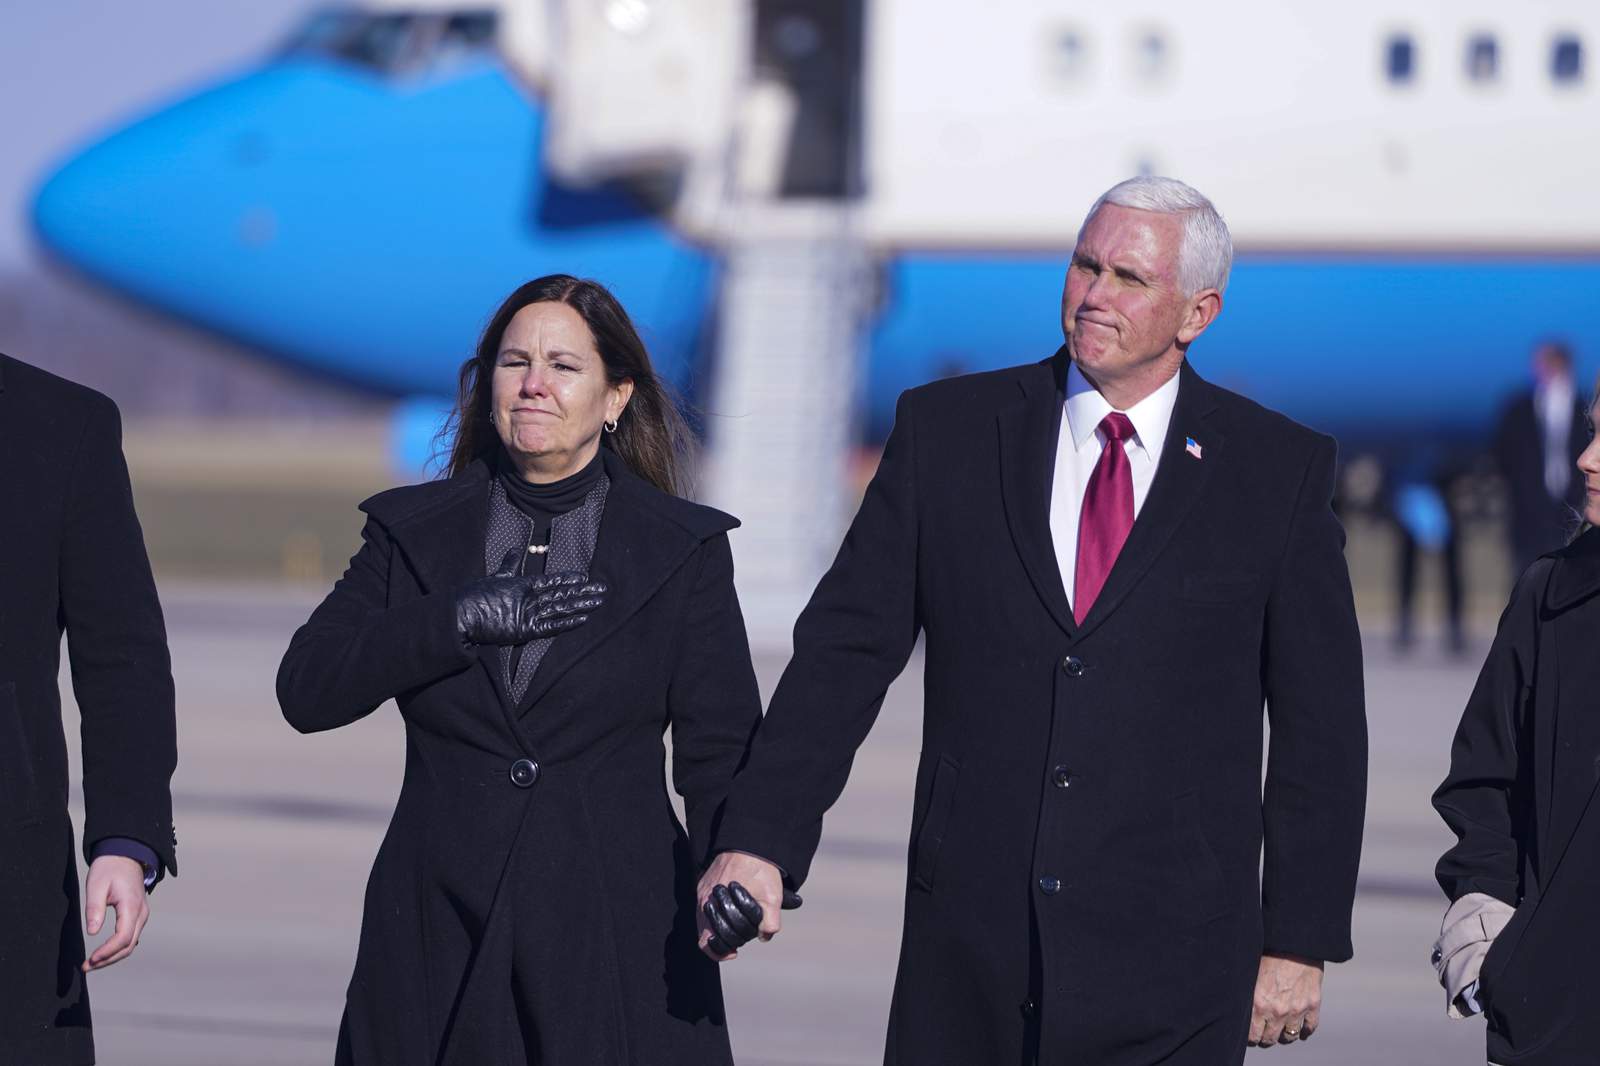 Trump’s heir? Pence reemerges, lays groundwork for 2024 run